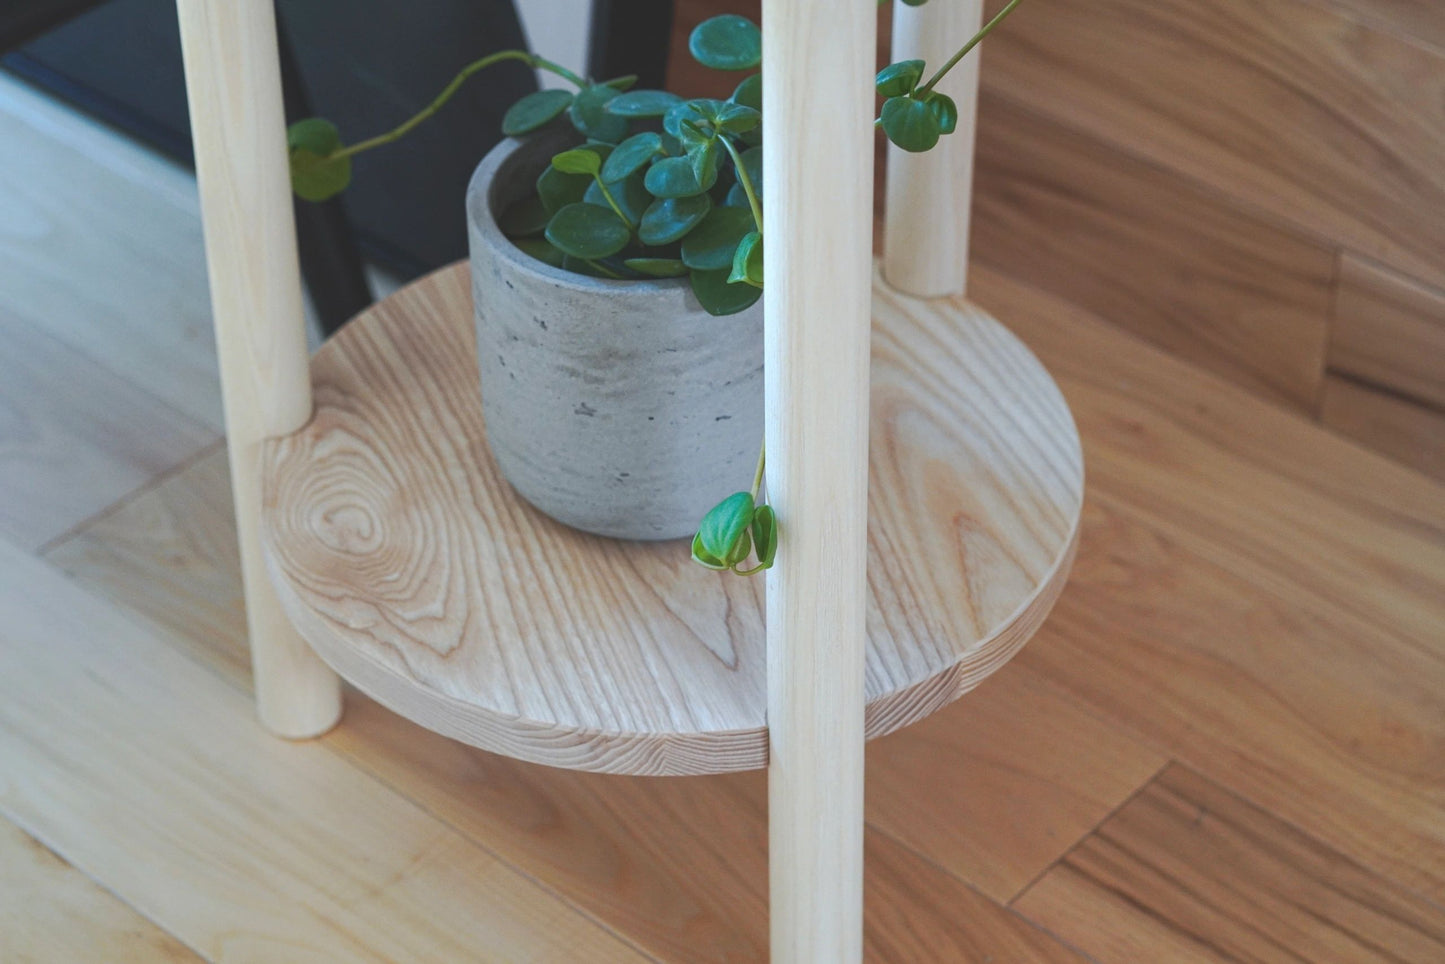 Wood Side Table Short